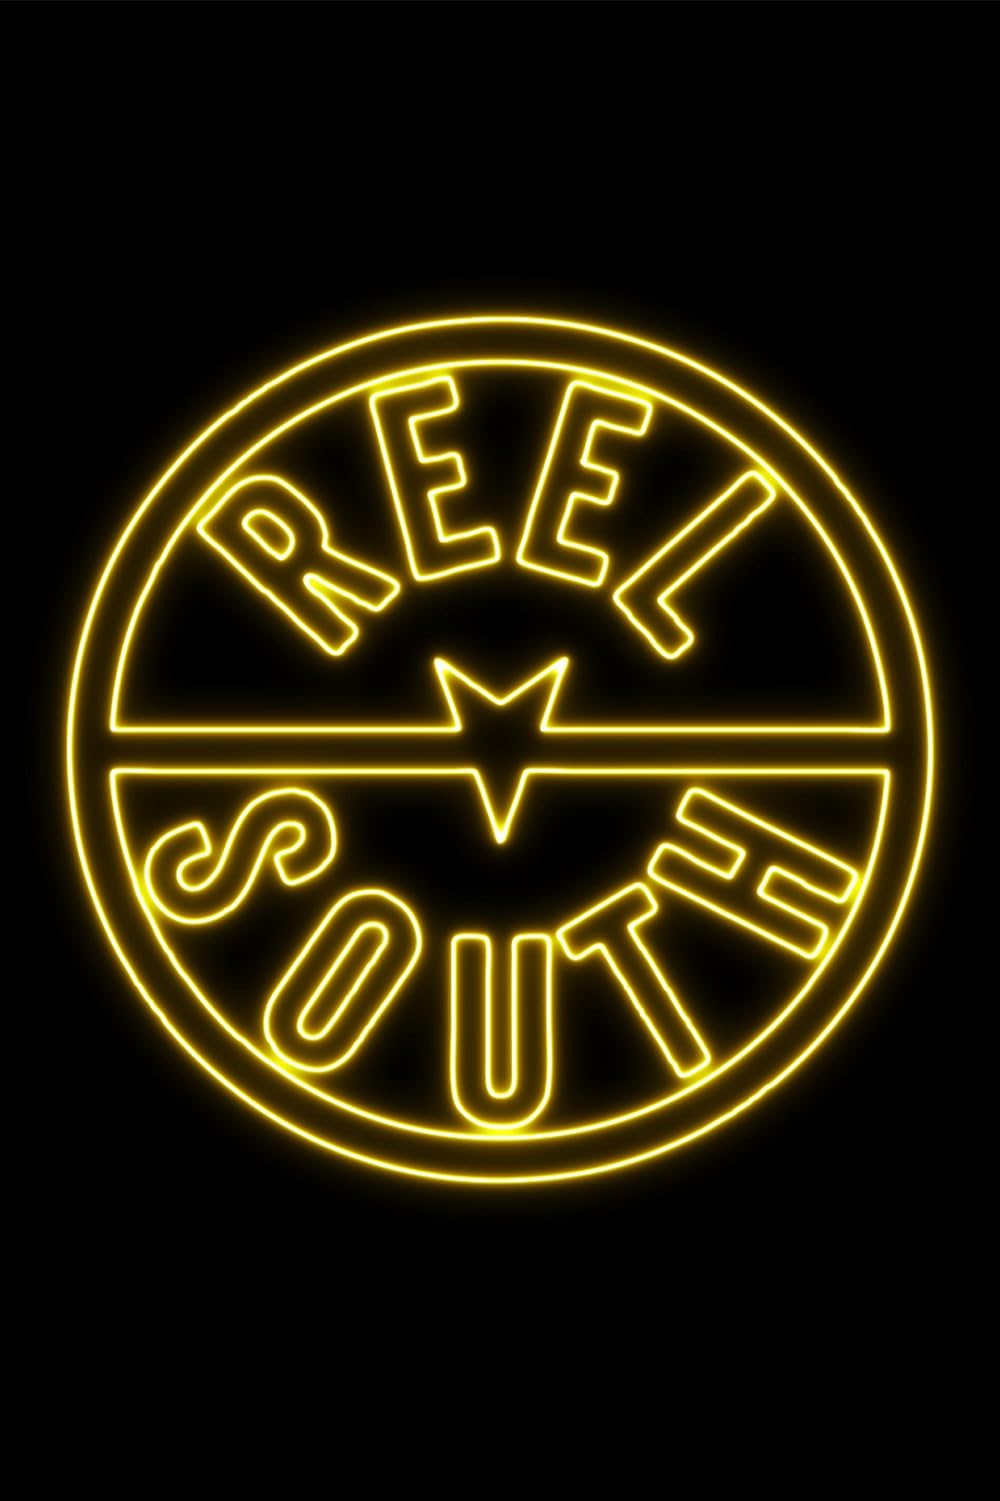 Reel South Two Trains Runnin' (TV Episode 2019)